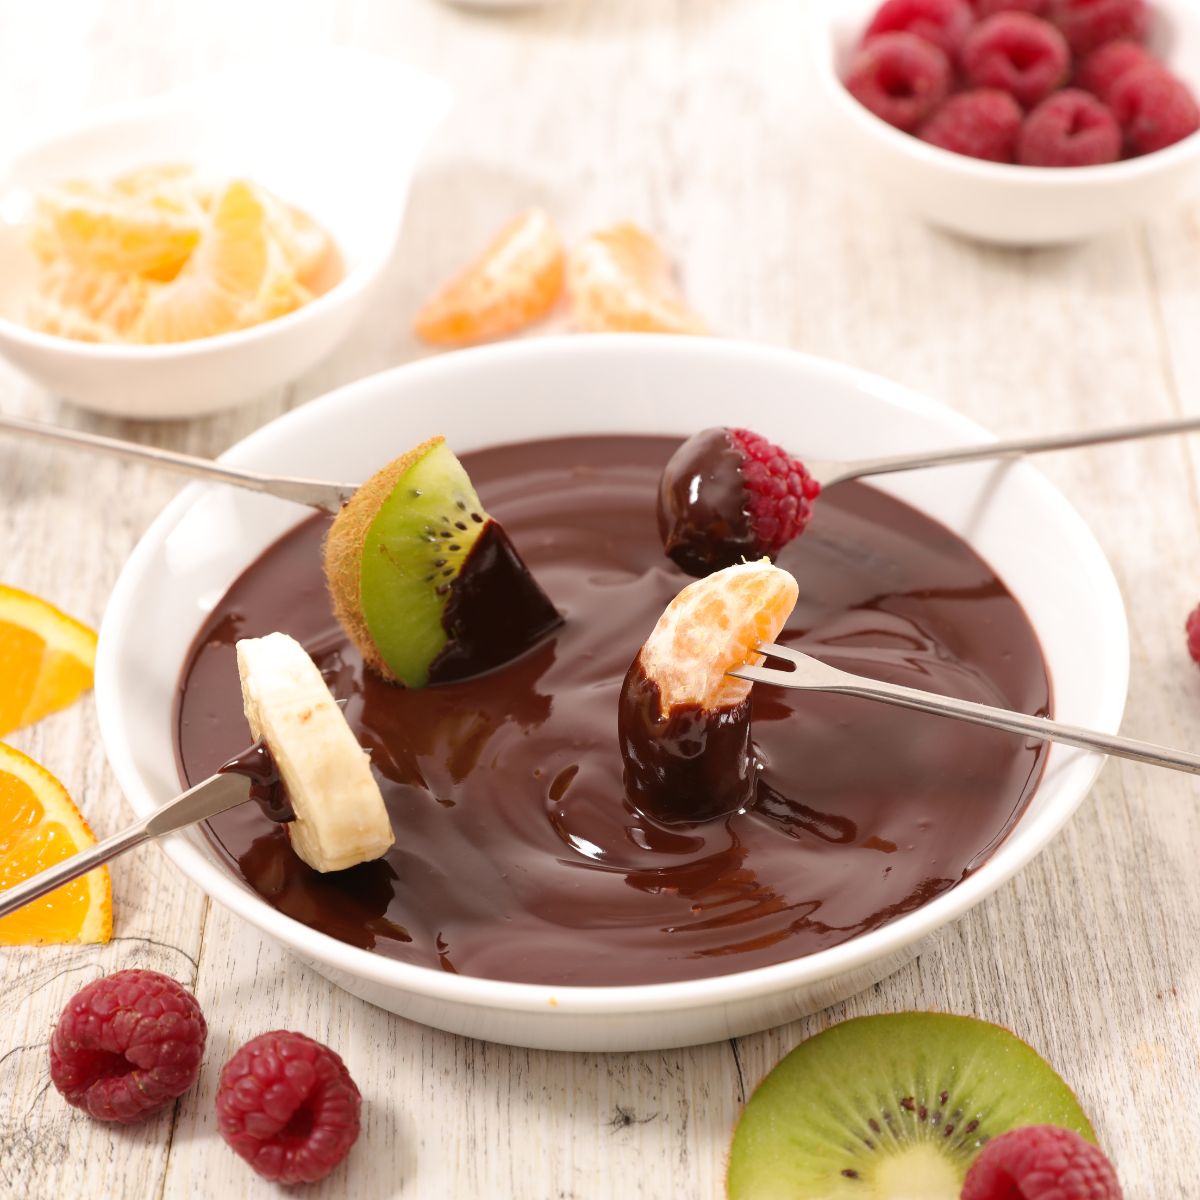 a bowl of choclate sauce for dipping fruit